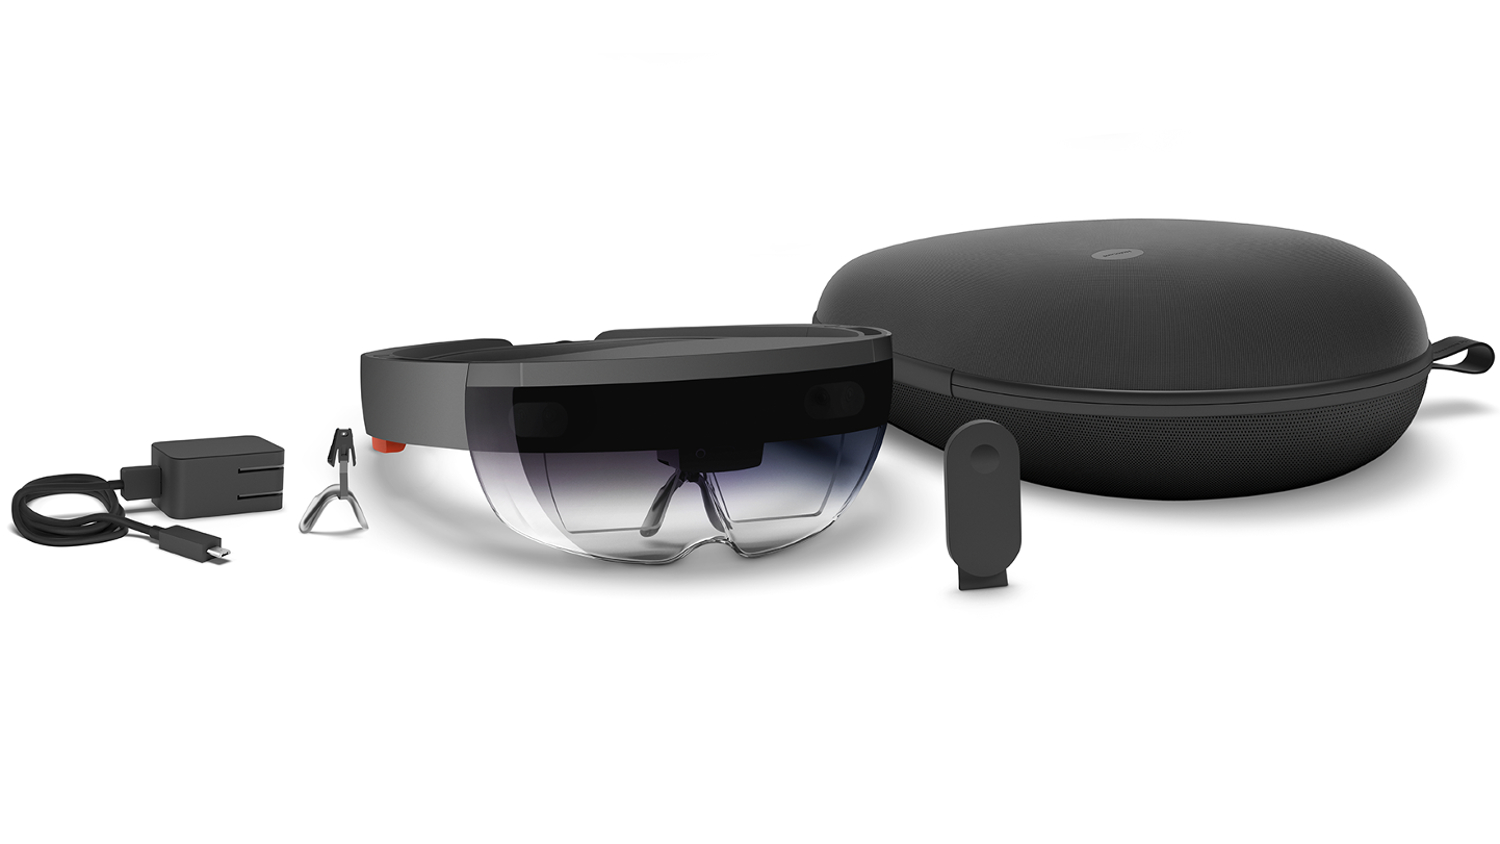 hololens development edition pre order ship date hololens16by9